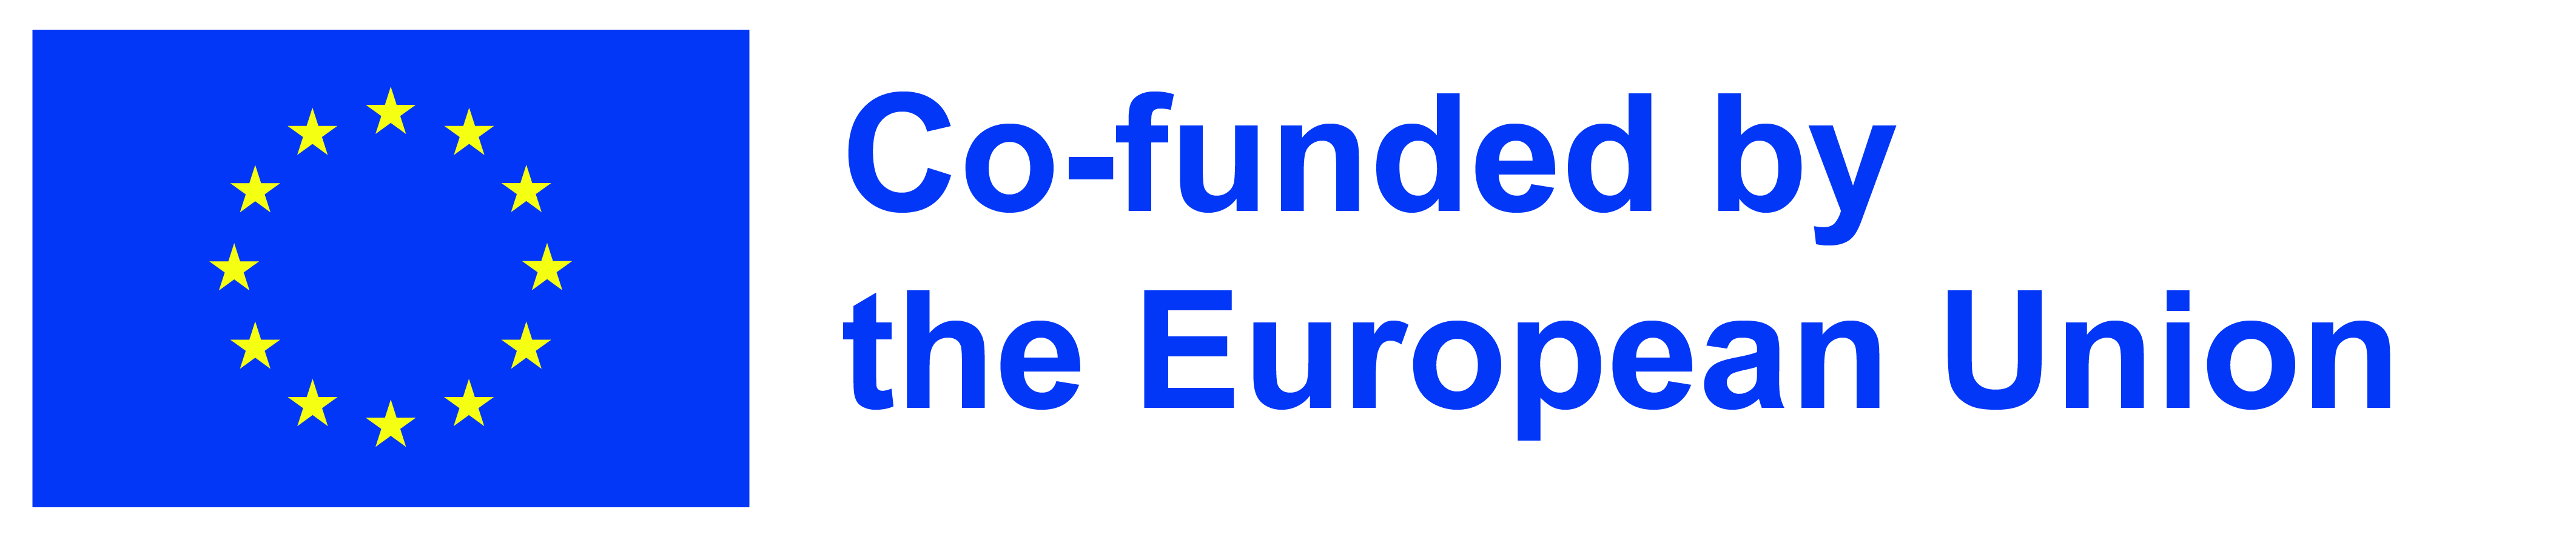 Co-funded by the EU flag